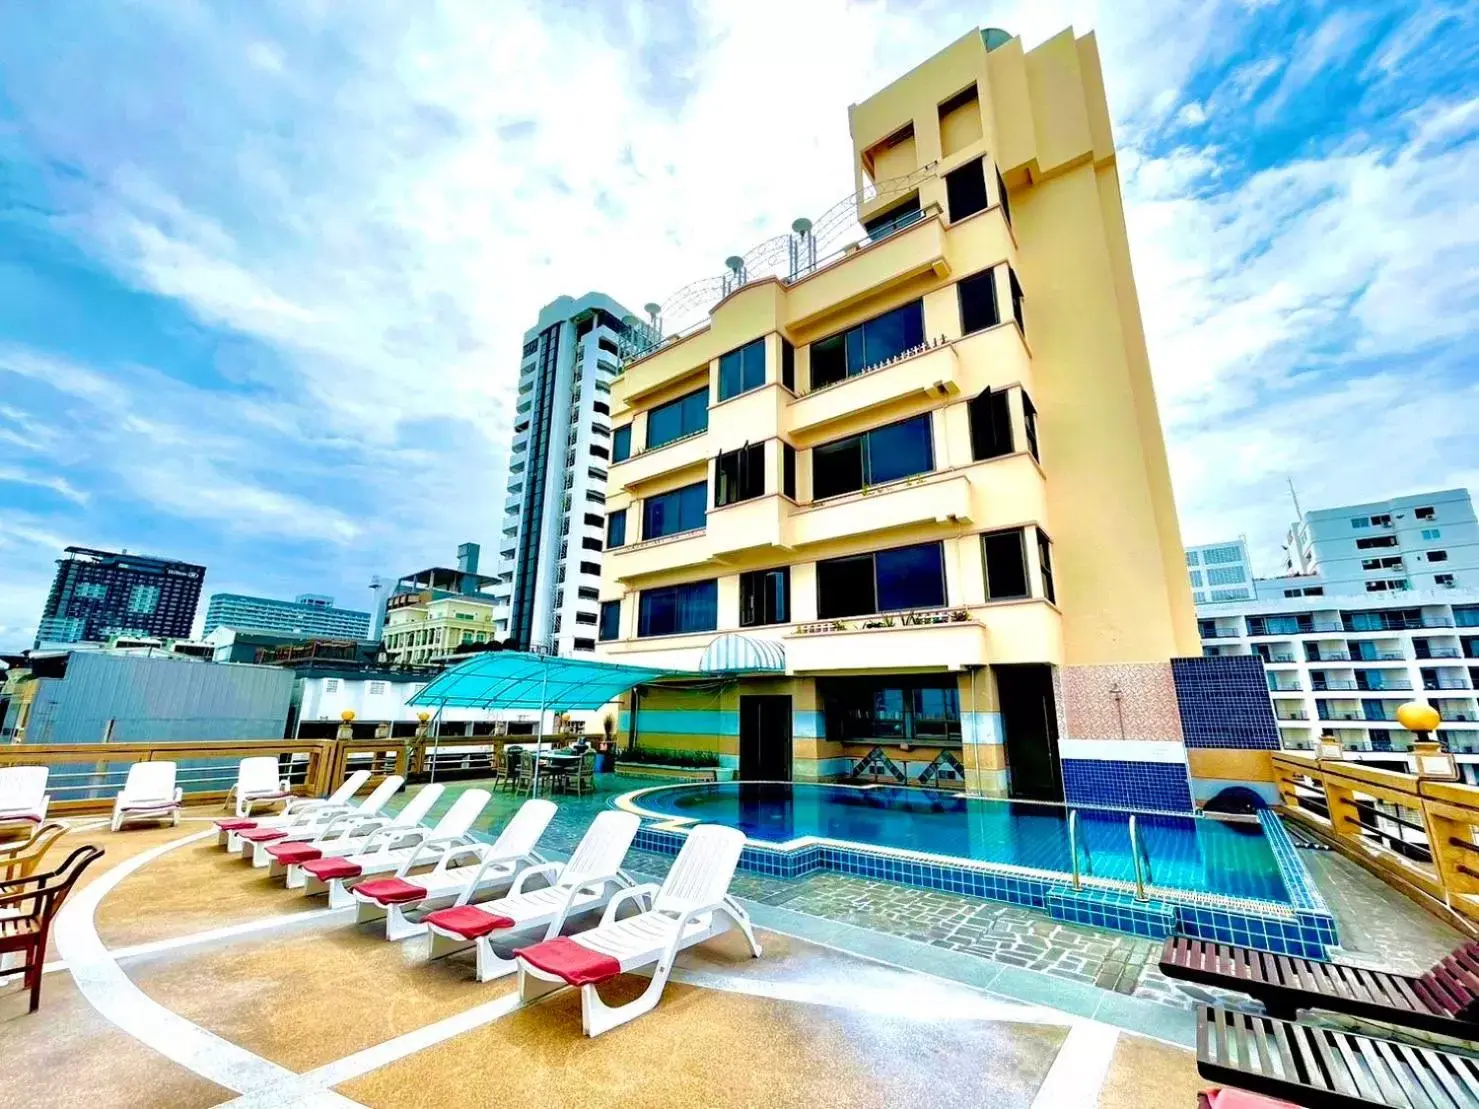 Property Building in AA Hotel Pattaya